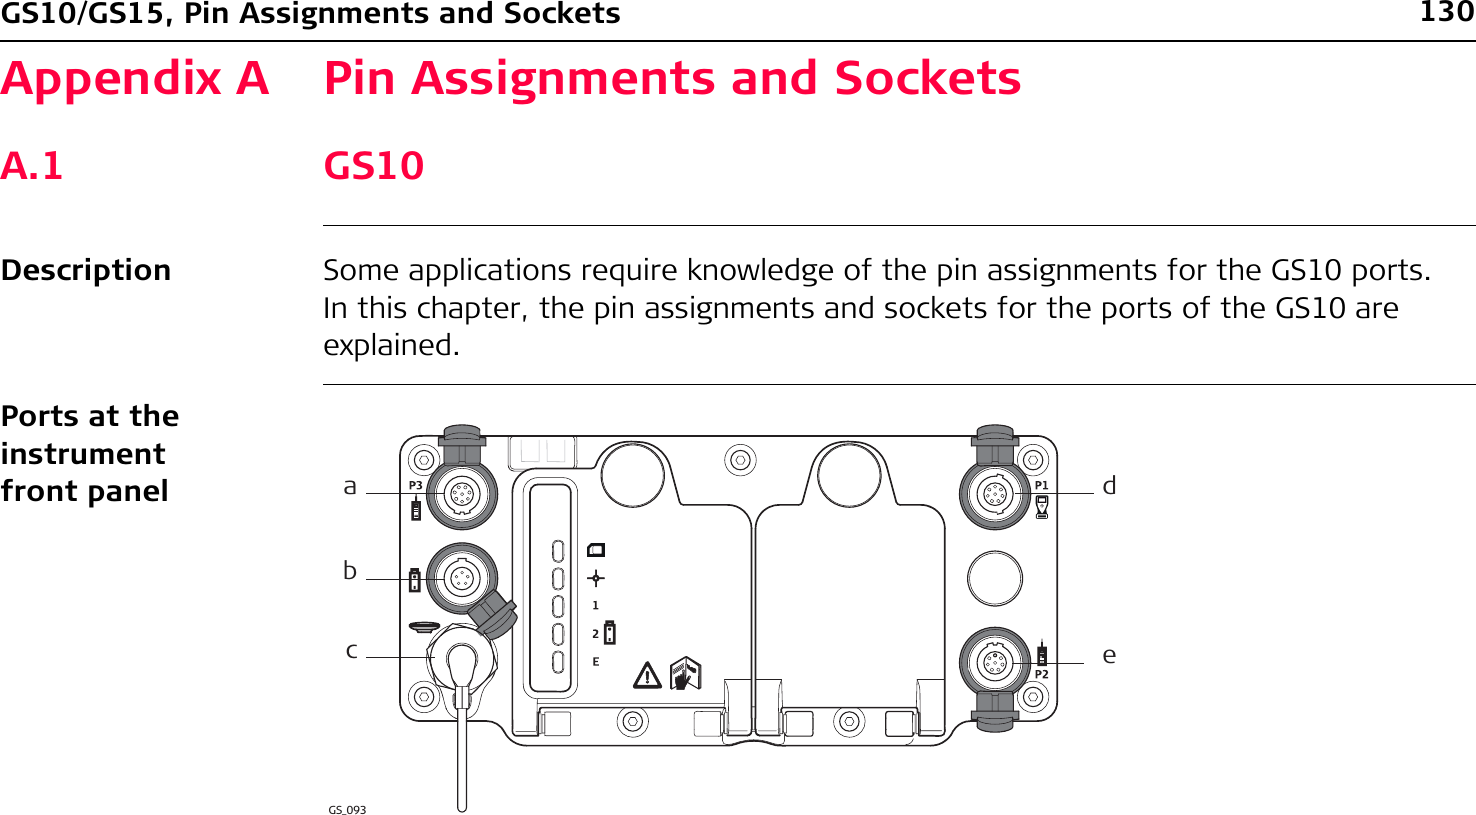 130GS10/GS15, Pin Assignments and SocketsAppendix A Pin Assignments and SocketsA.1 GS10Description Some applications require knowledge of the pin assignments for the GS10 ports. In this chapter, the pin assignments and sockets for the ports of the GS10 are explained.Ports at the instrument front panelGS_093abcde